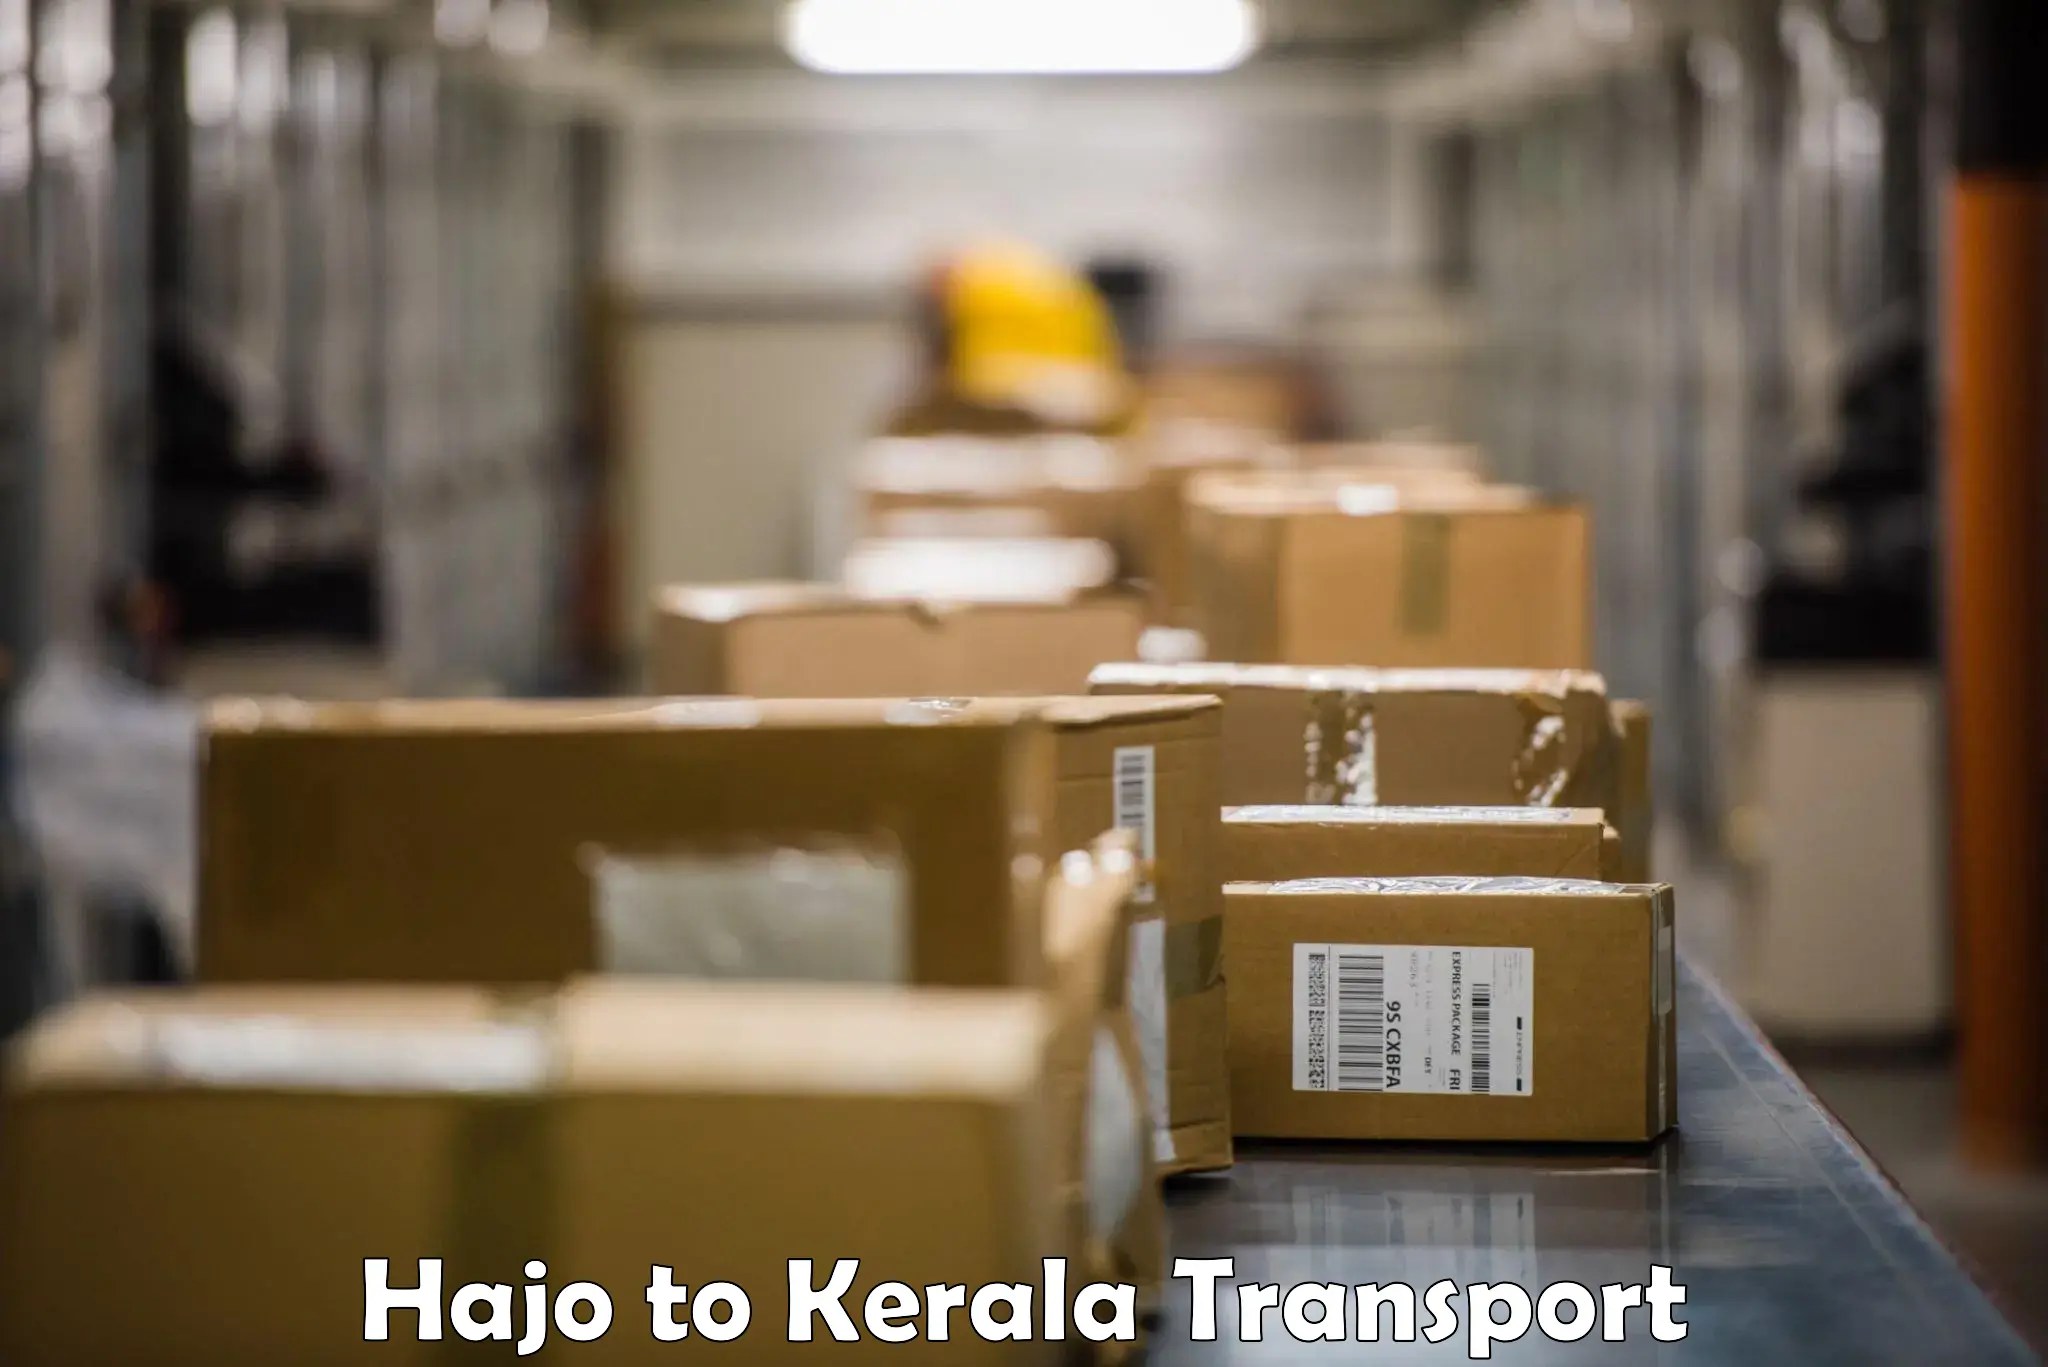 Commercial transport service Hajo to Cochin University of Science and Technology